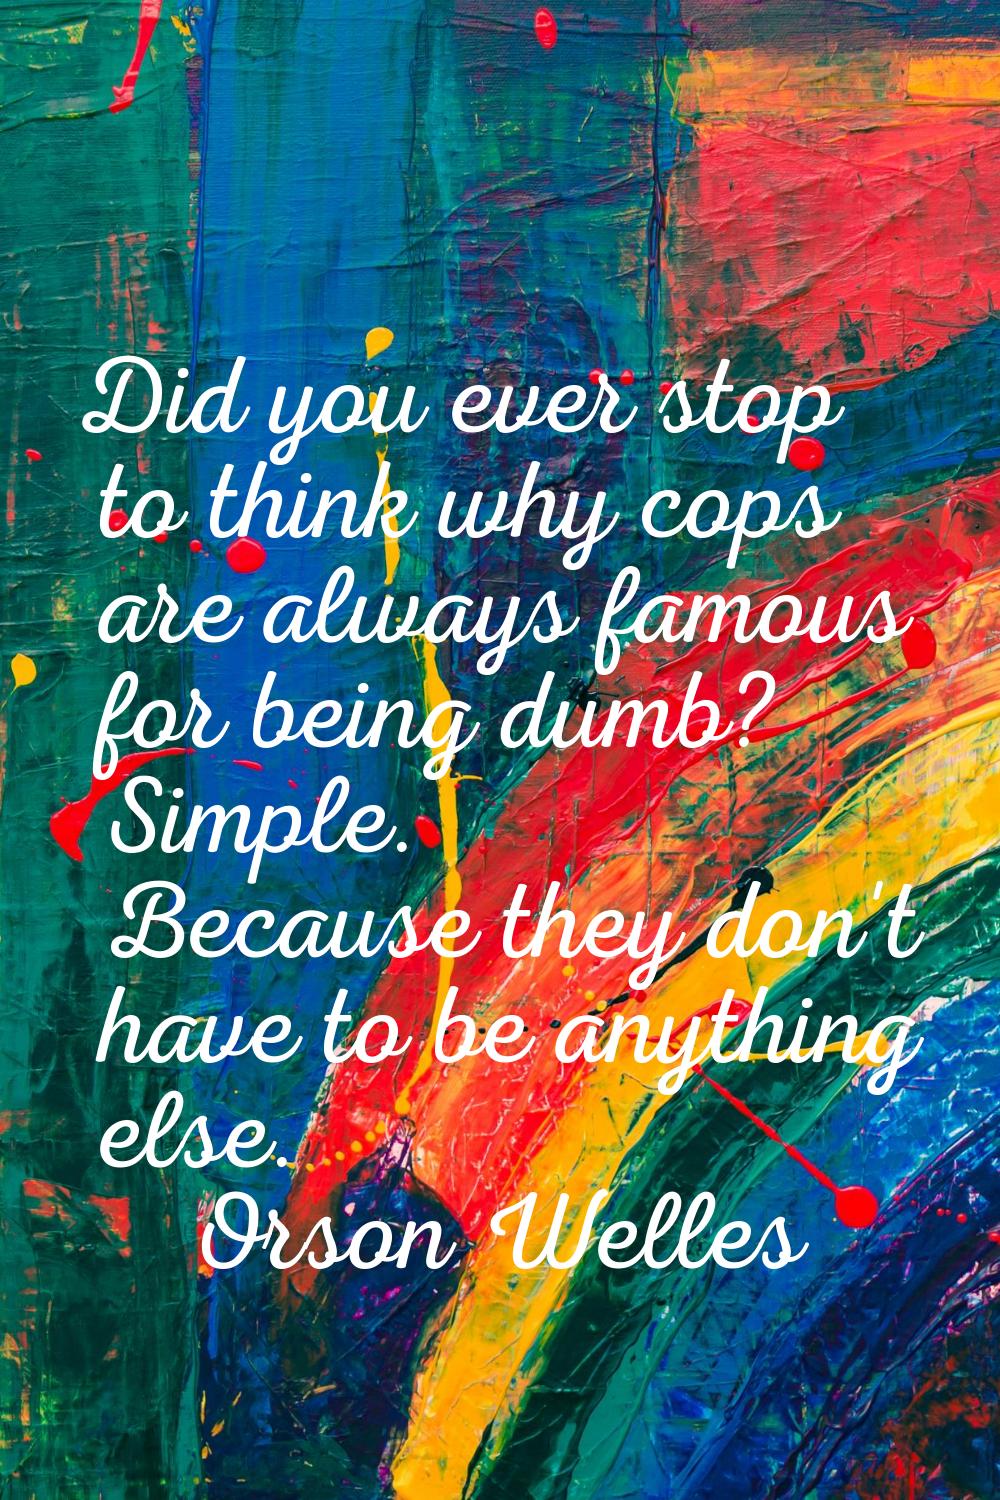 Did you ever stop to think why cops are always famous for being dumb? Simple. Because they don't ha